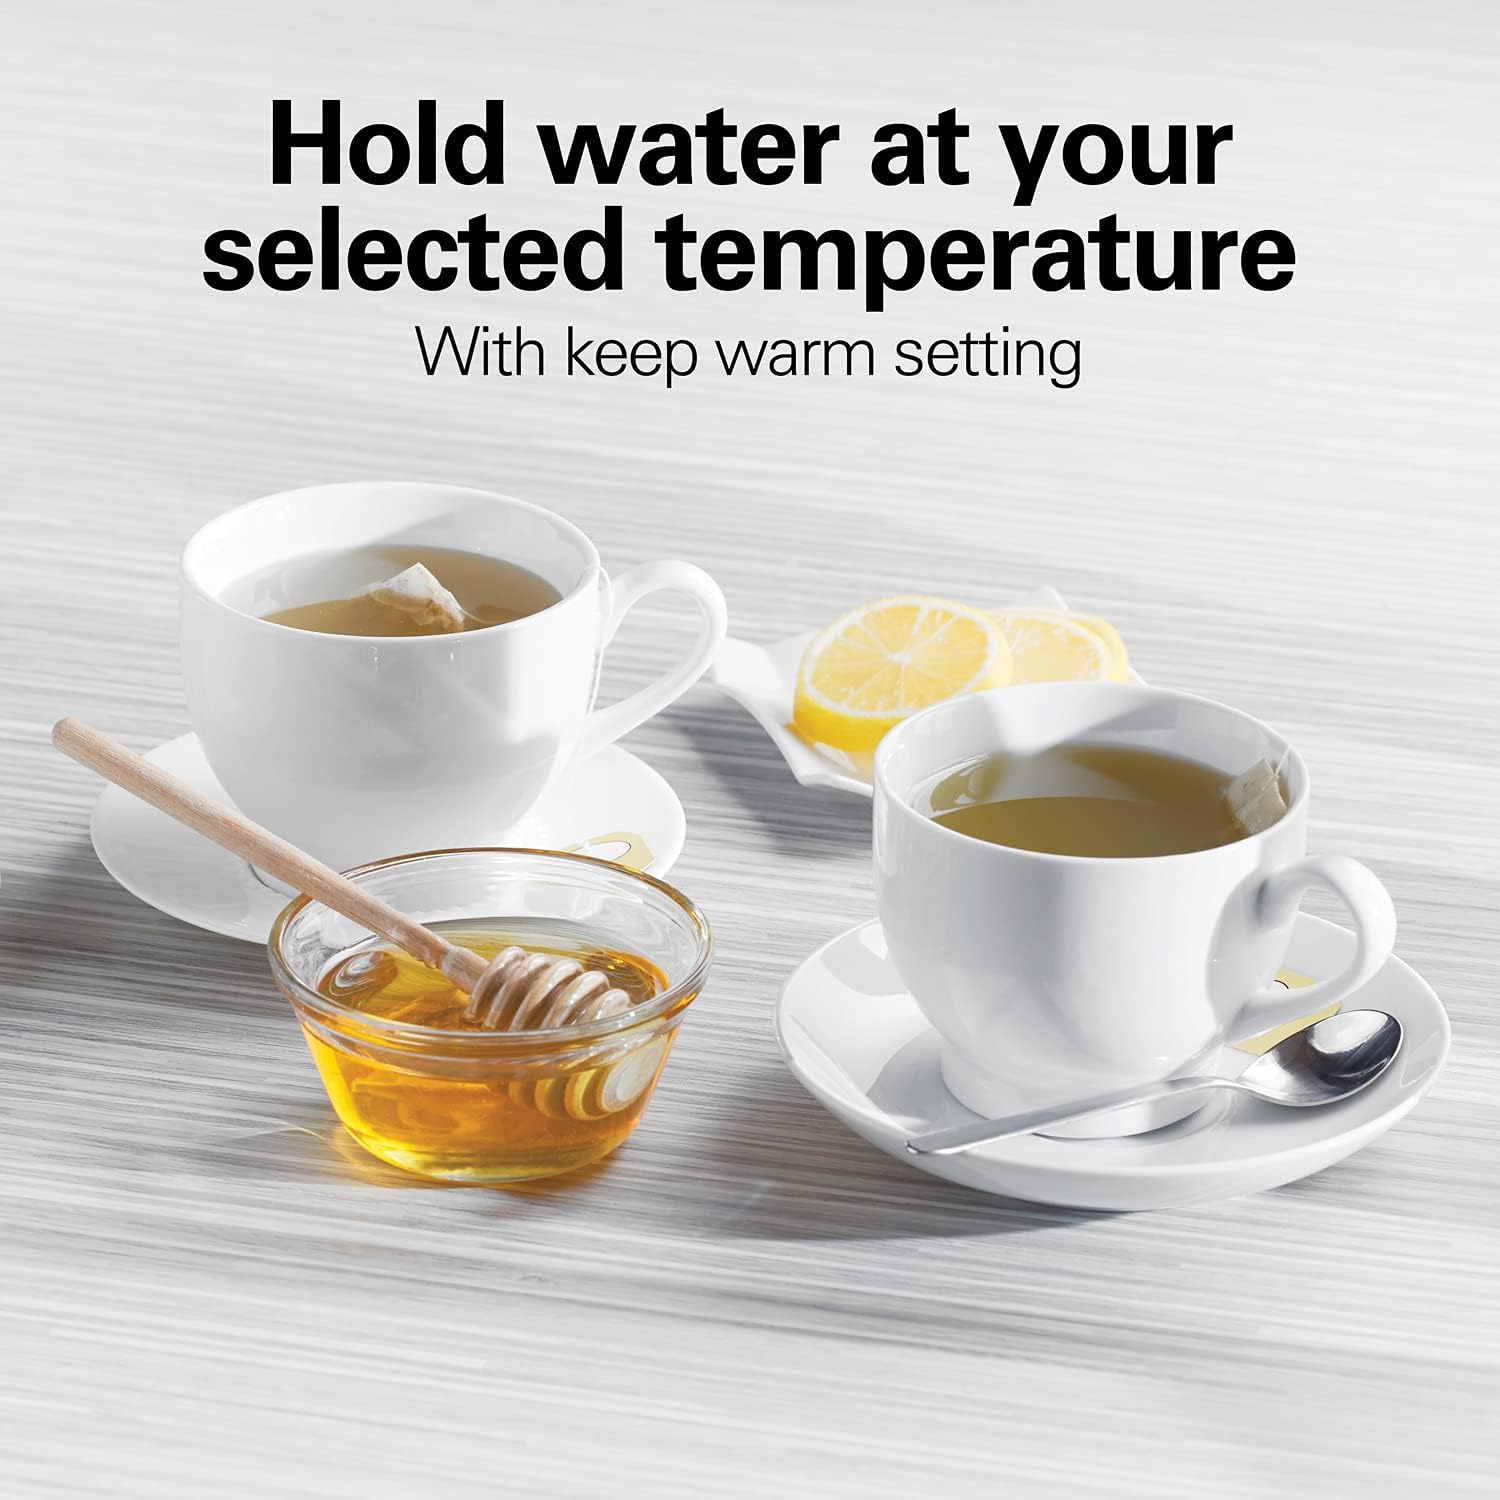 https://bigbigmart.com/wp-content/uploads/2023/07/Hamilton-Beach-Temperature-Control-Glass-Electric-Hot-Water-Kettle-Boiler-with-Removable-Tea-Infuser-1.7L-Cordless-Keep-Warm-Auto-Shutoff-Boil-Dry-Protection-409423.jpg